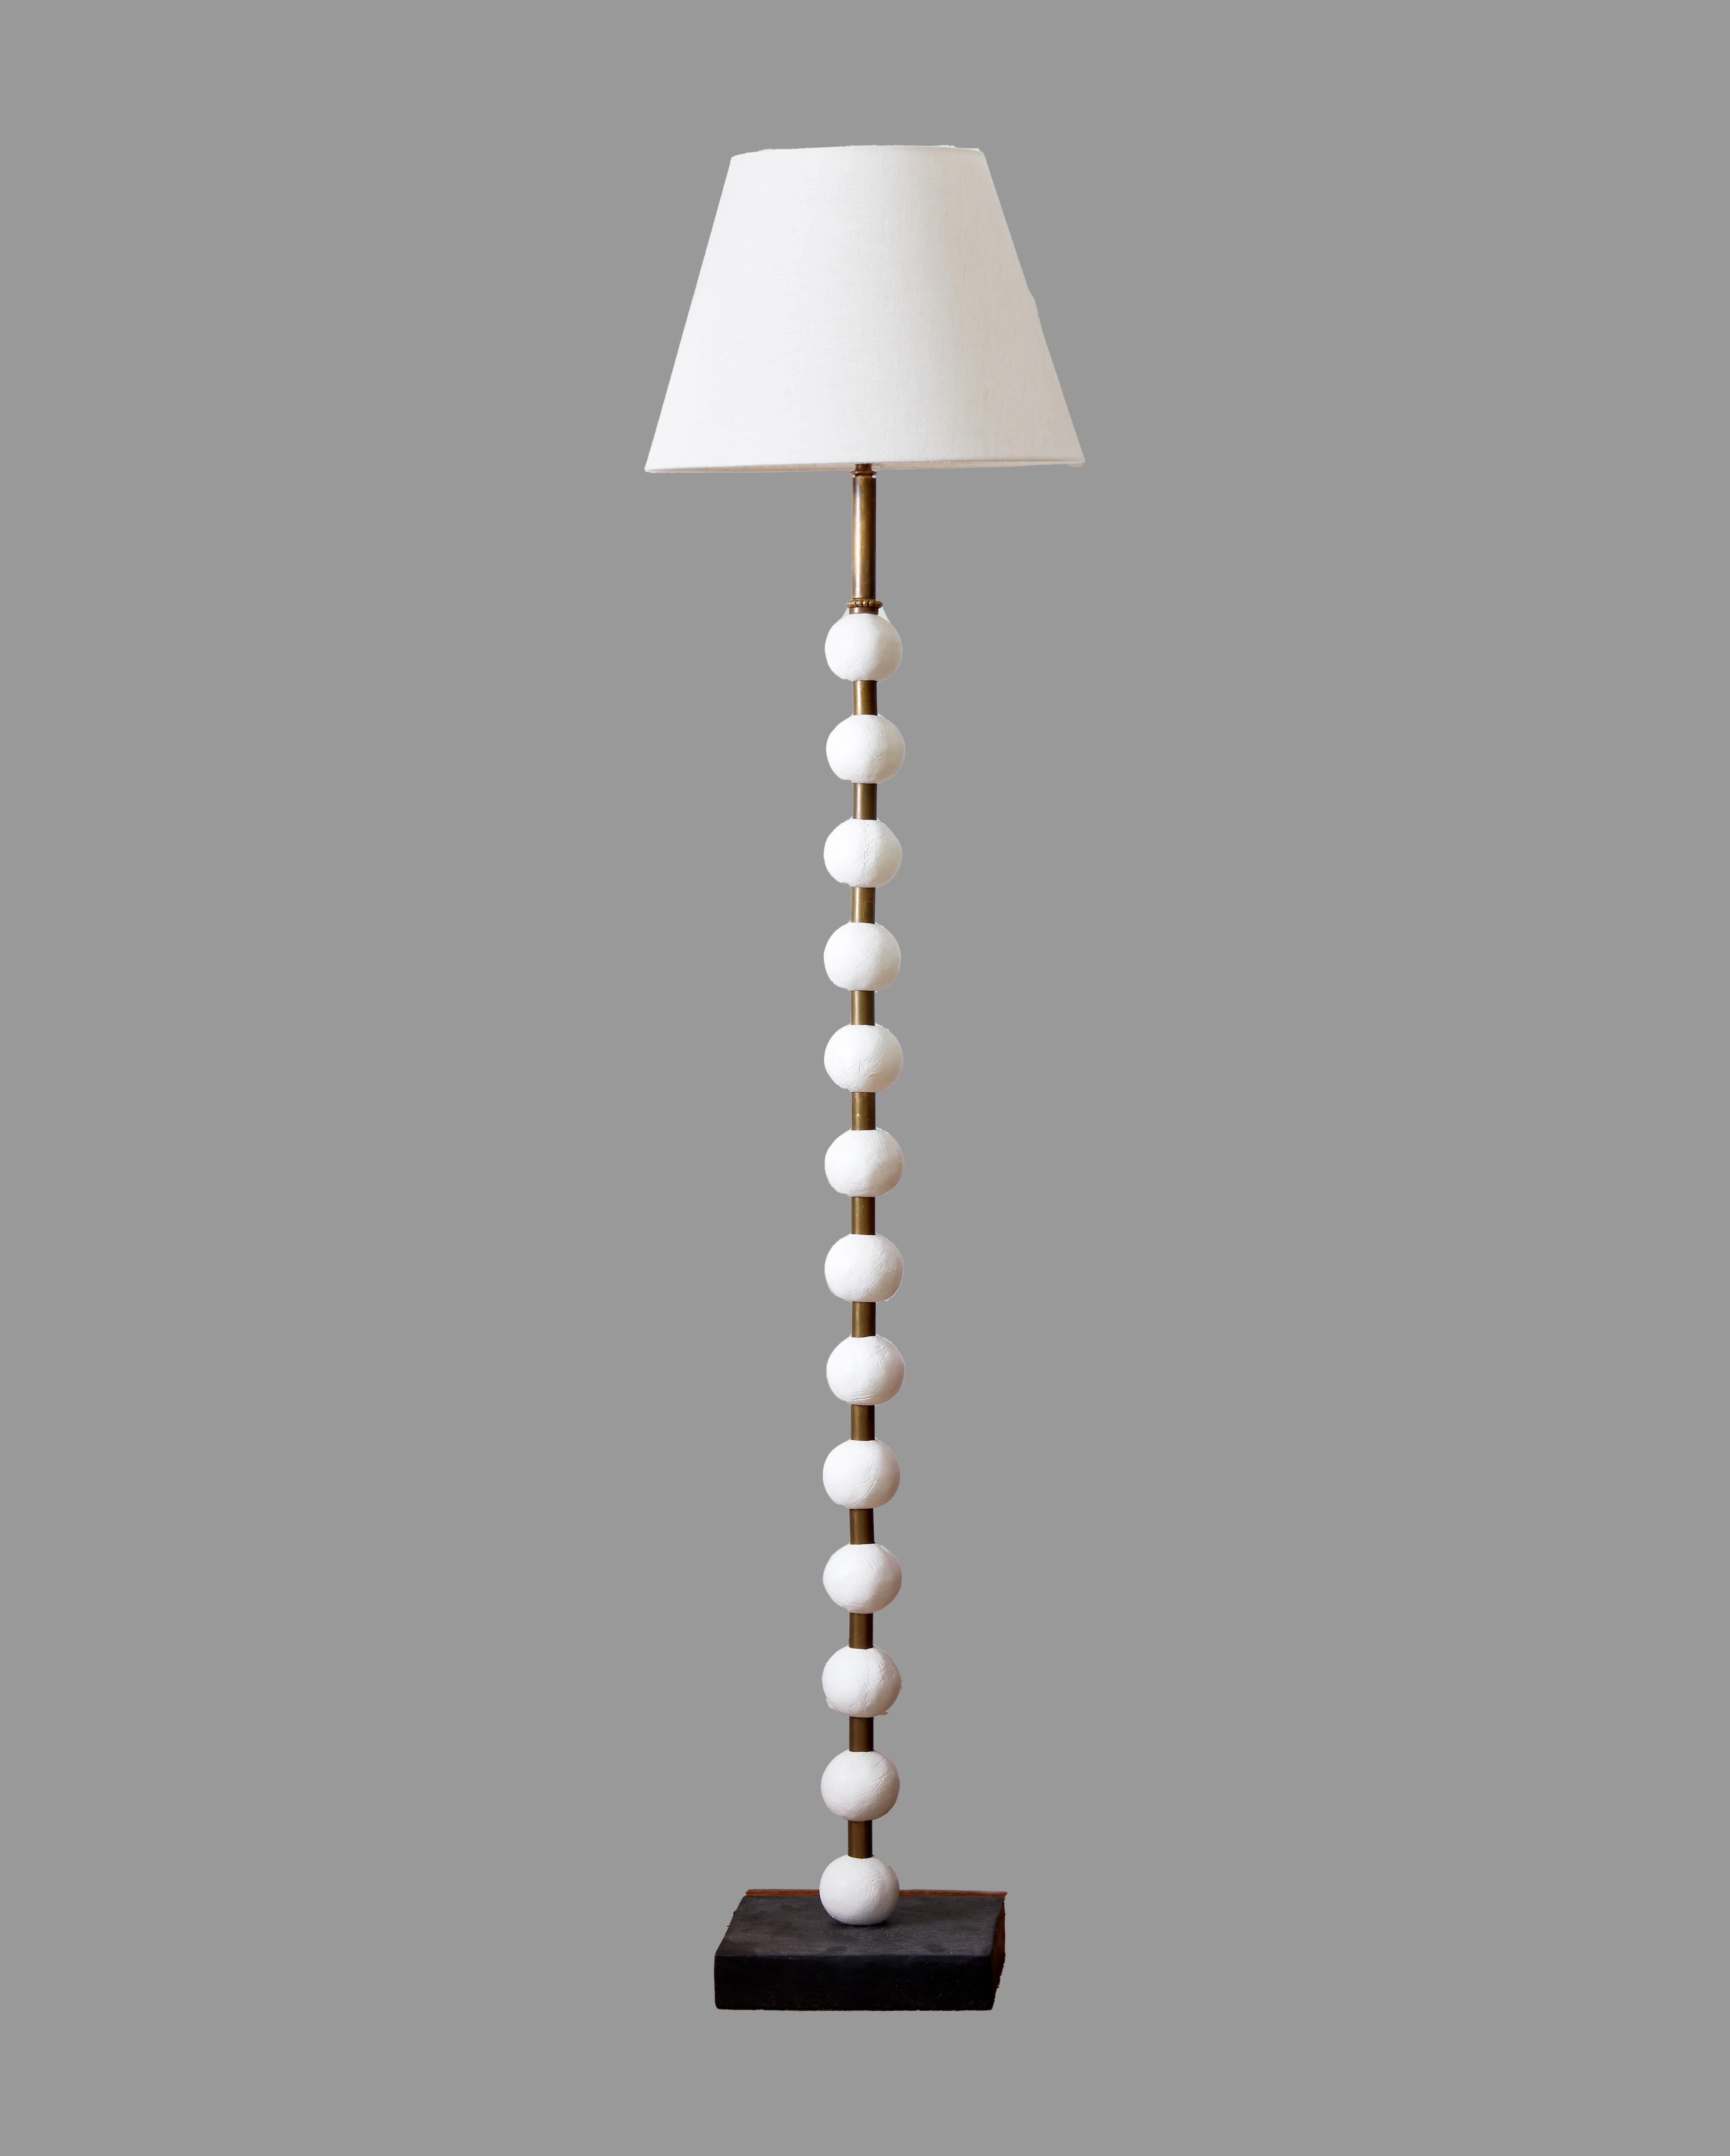 English Pearl Floor Lamp, Brass and Slate, White Pigmented Resin by Margit Wittig